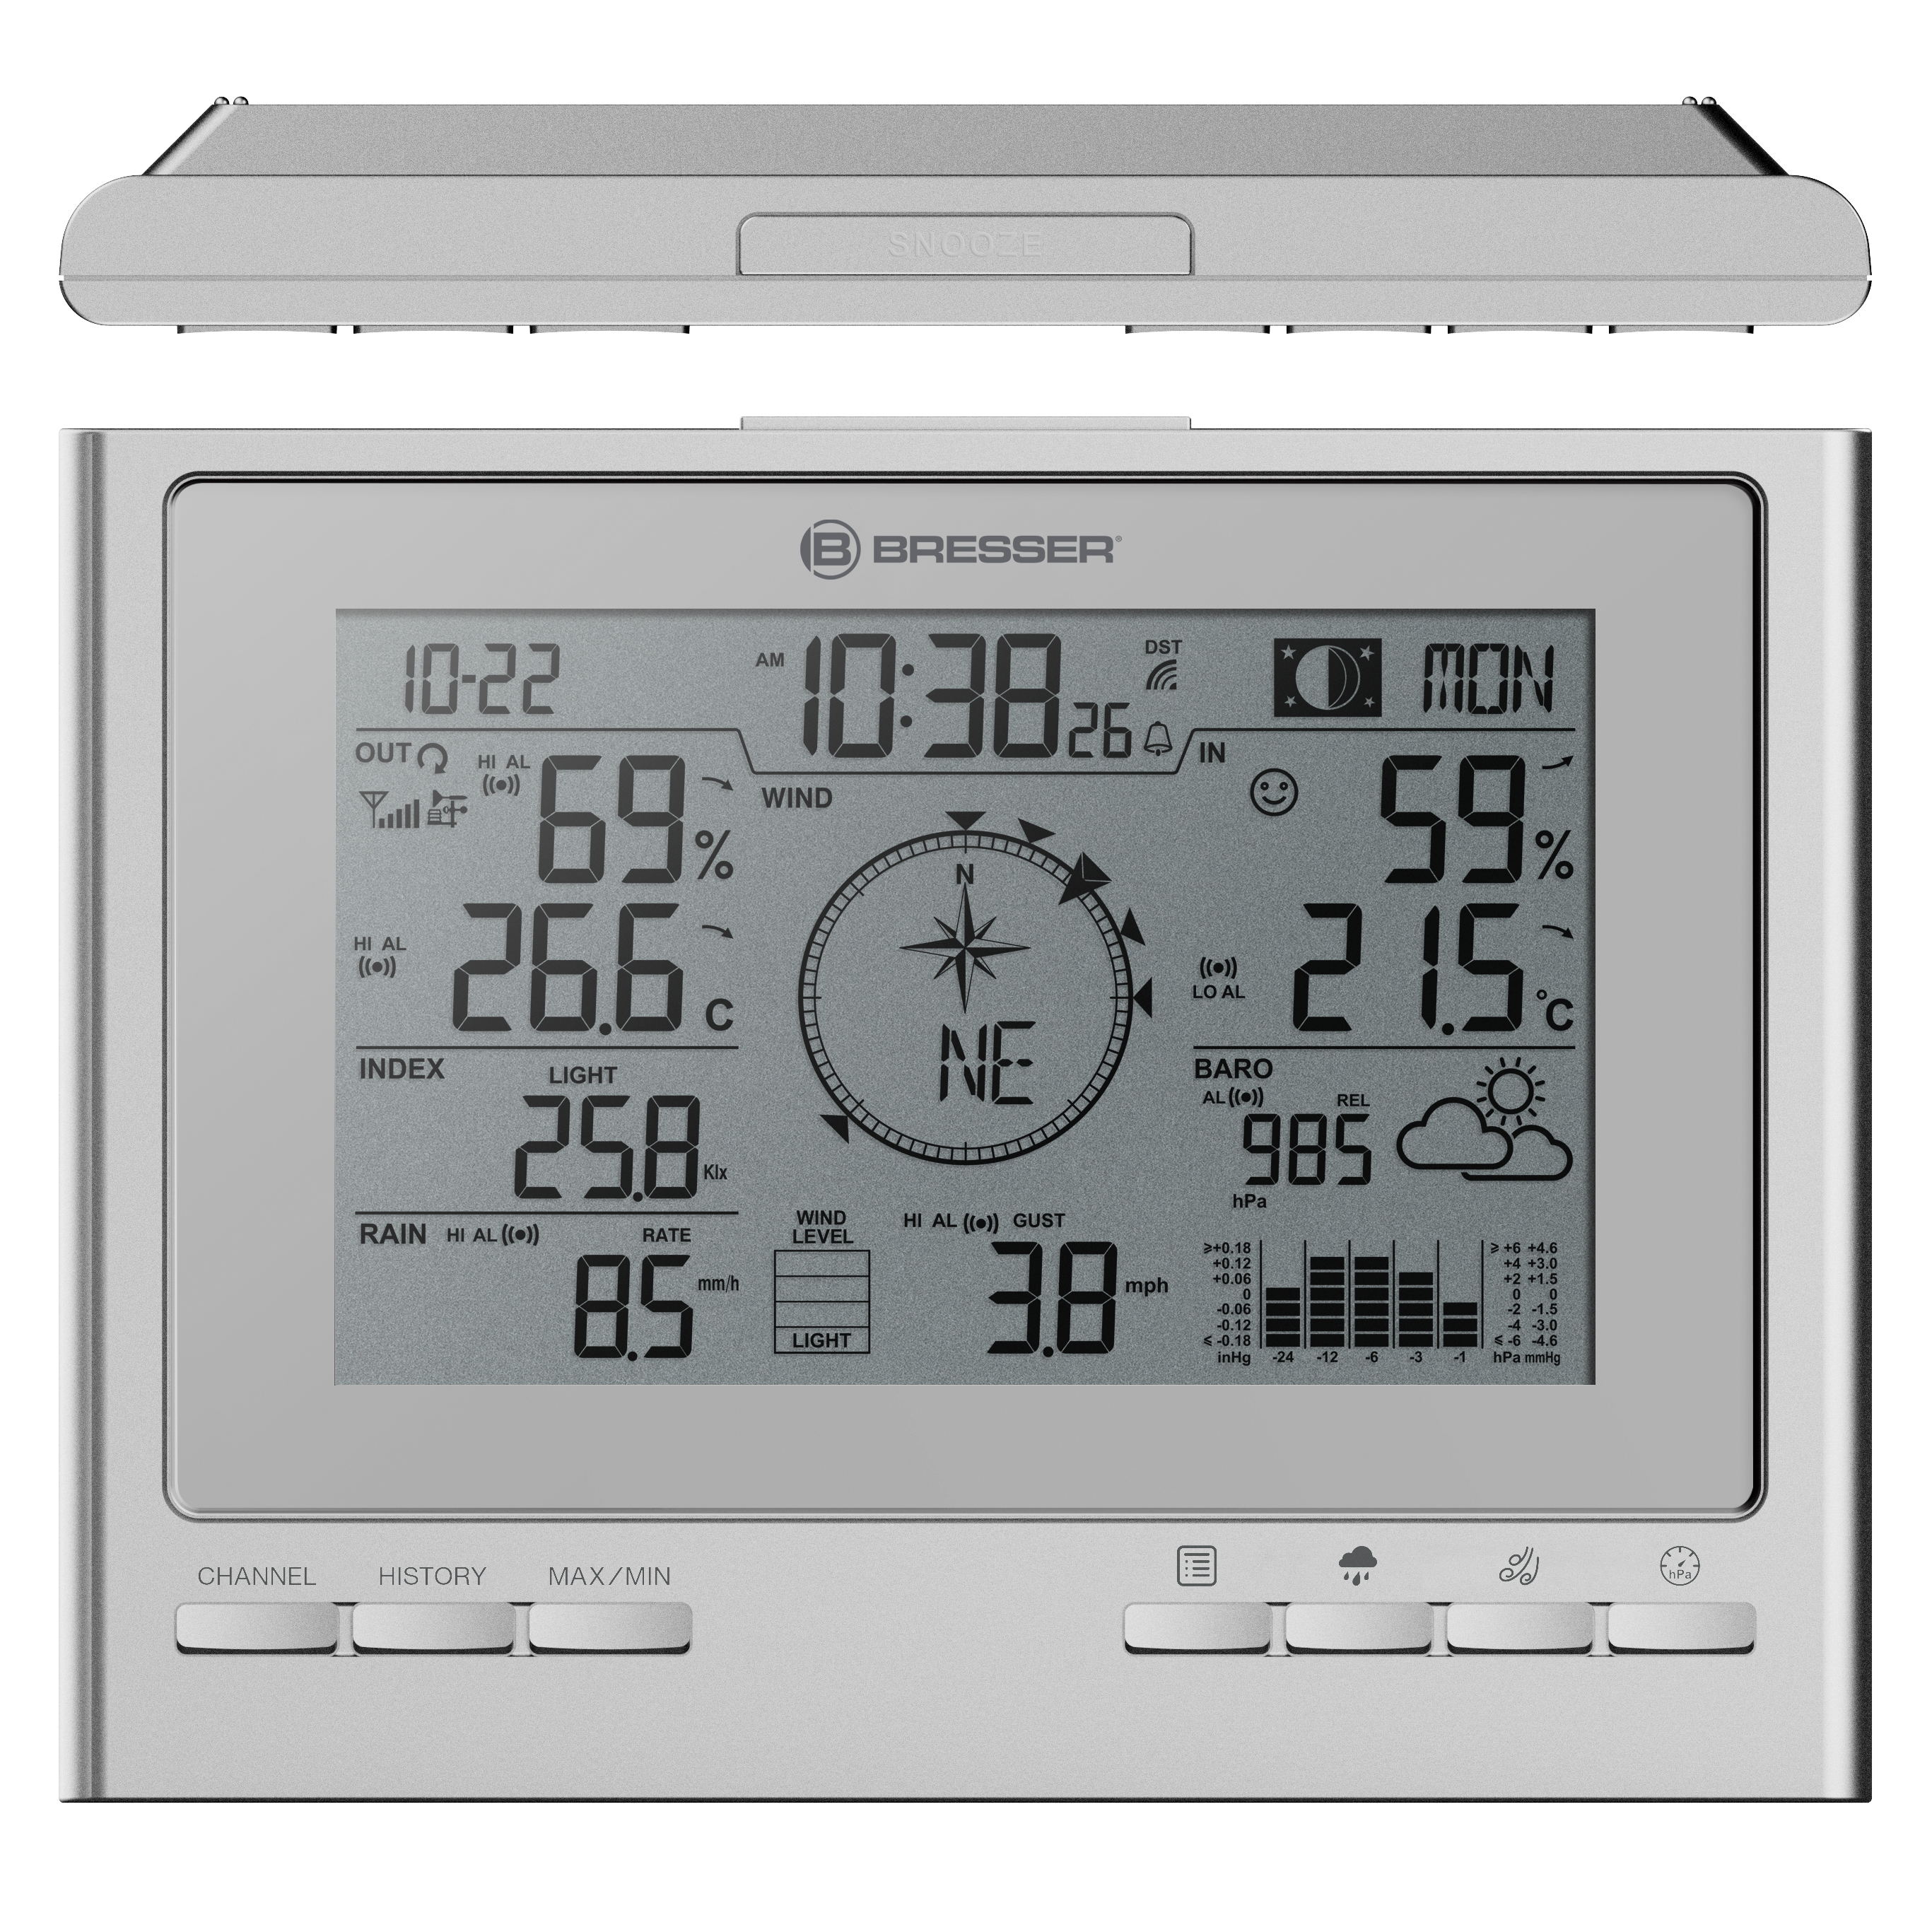 BRESSER 7-in-1 Exklusive Wetterstation ClimateScout Funk